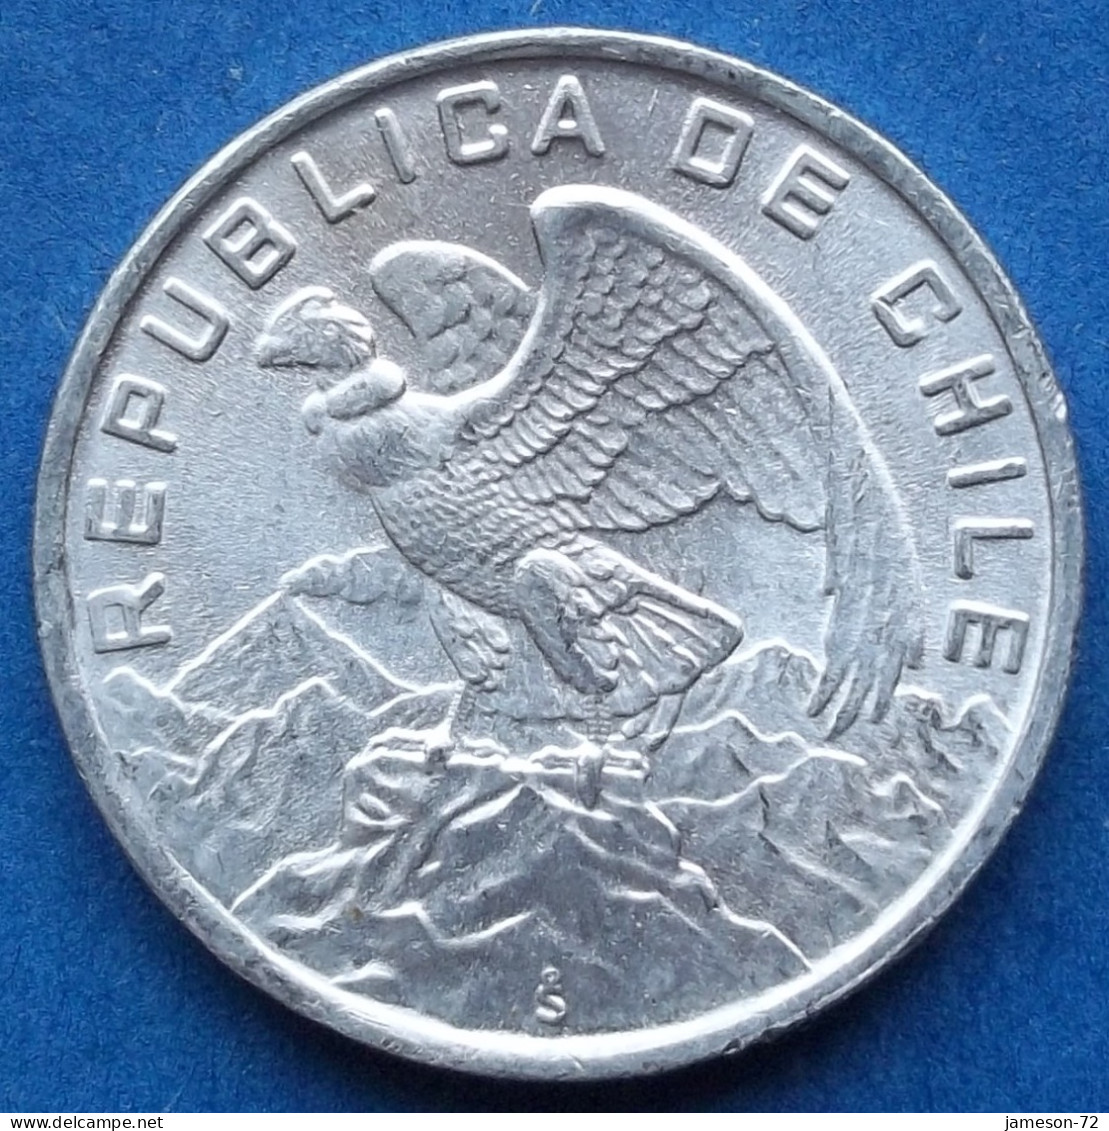 CHILE - 10 Escudos 1974 KM# 200 Monetary Reform (1960-1975) - Edelweiss Coins - Chili